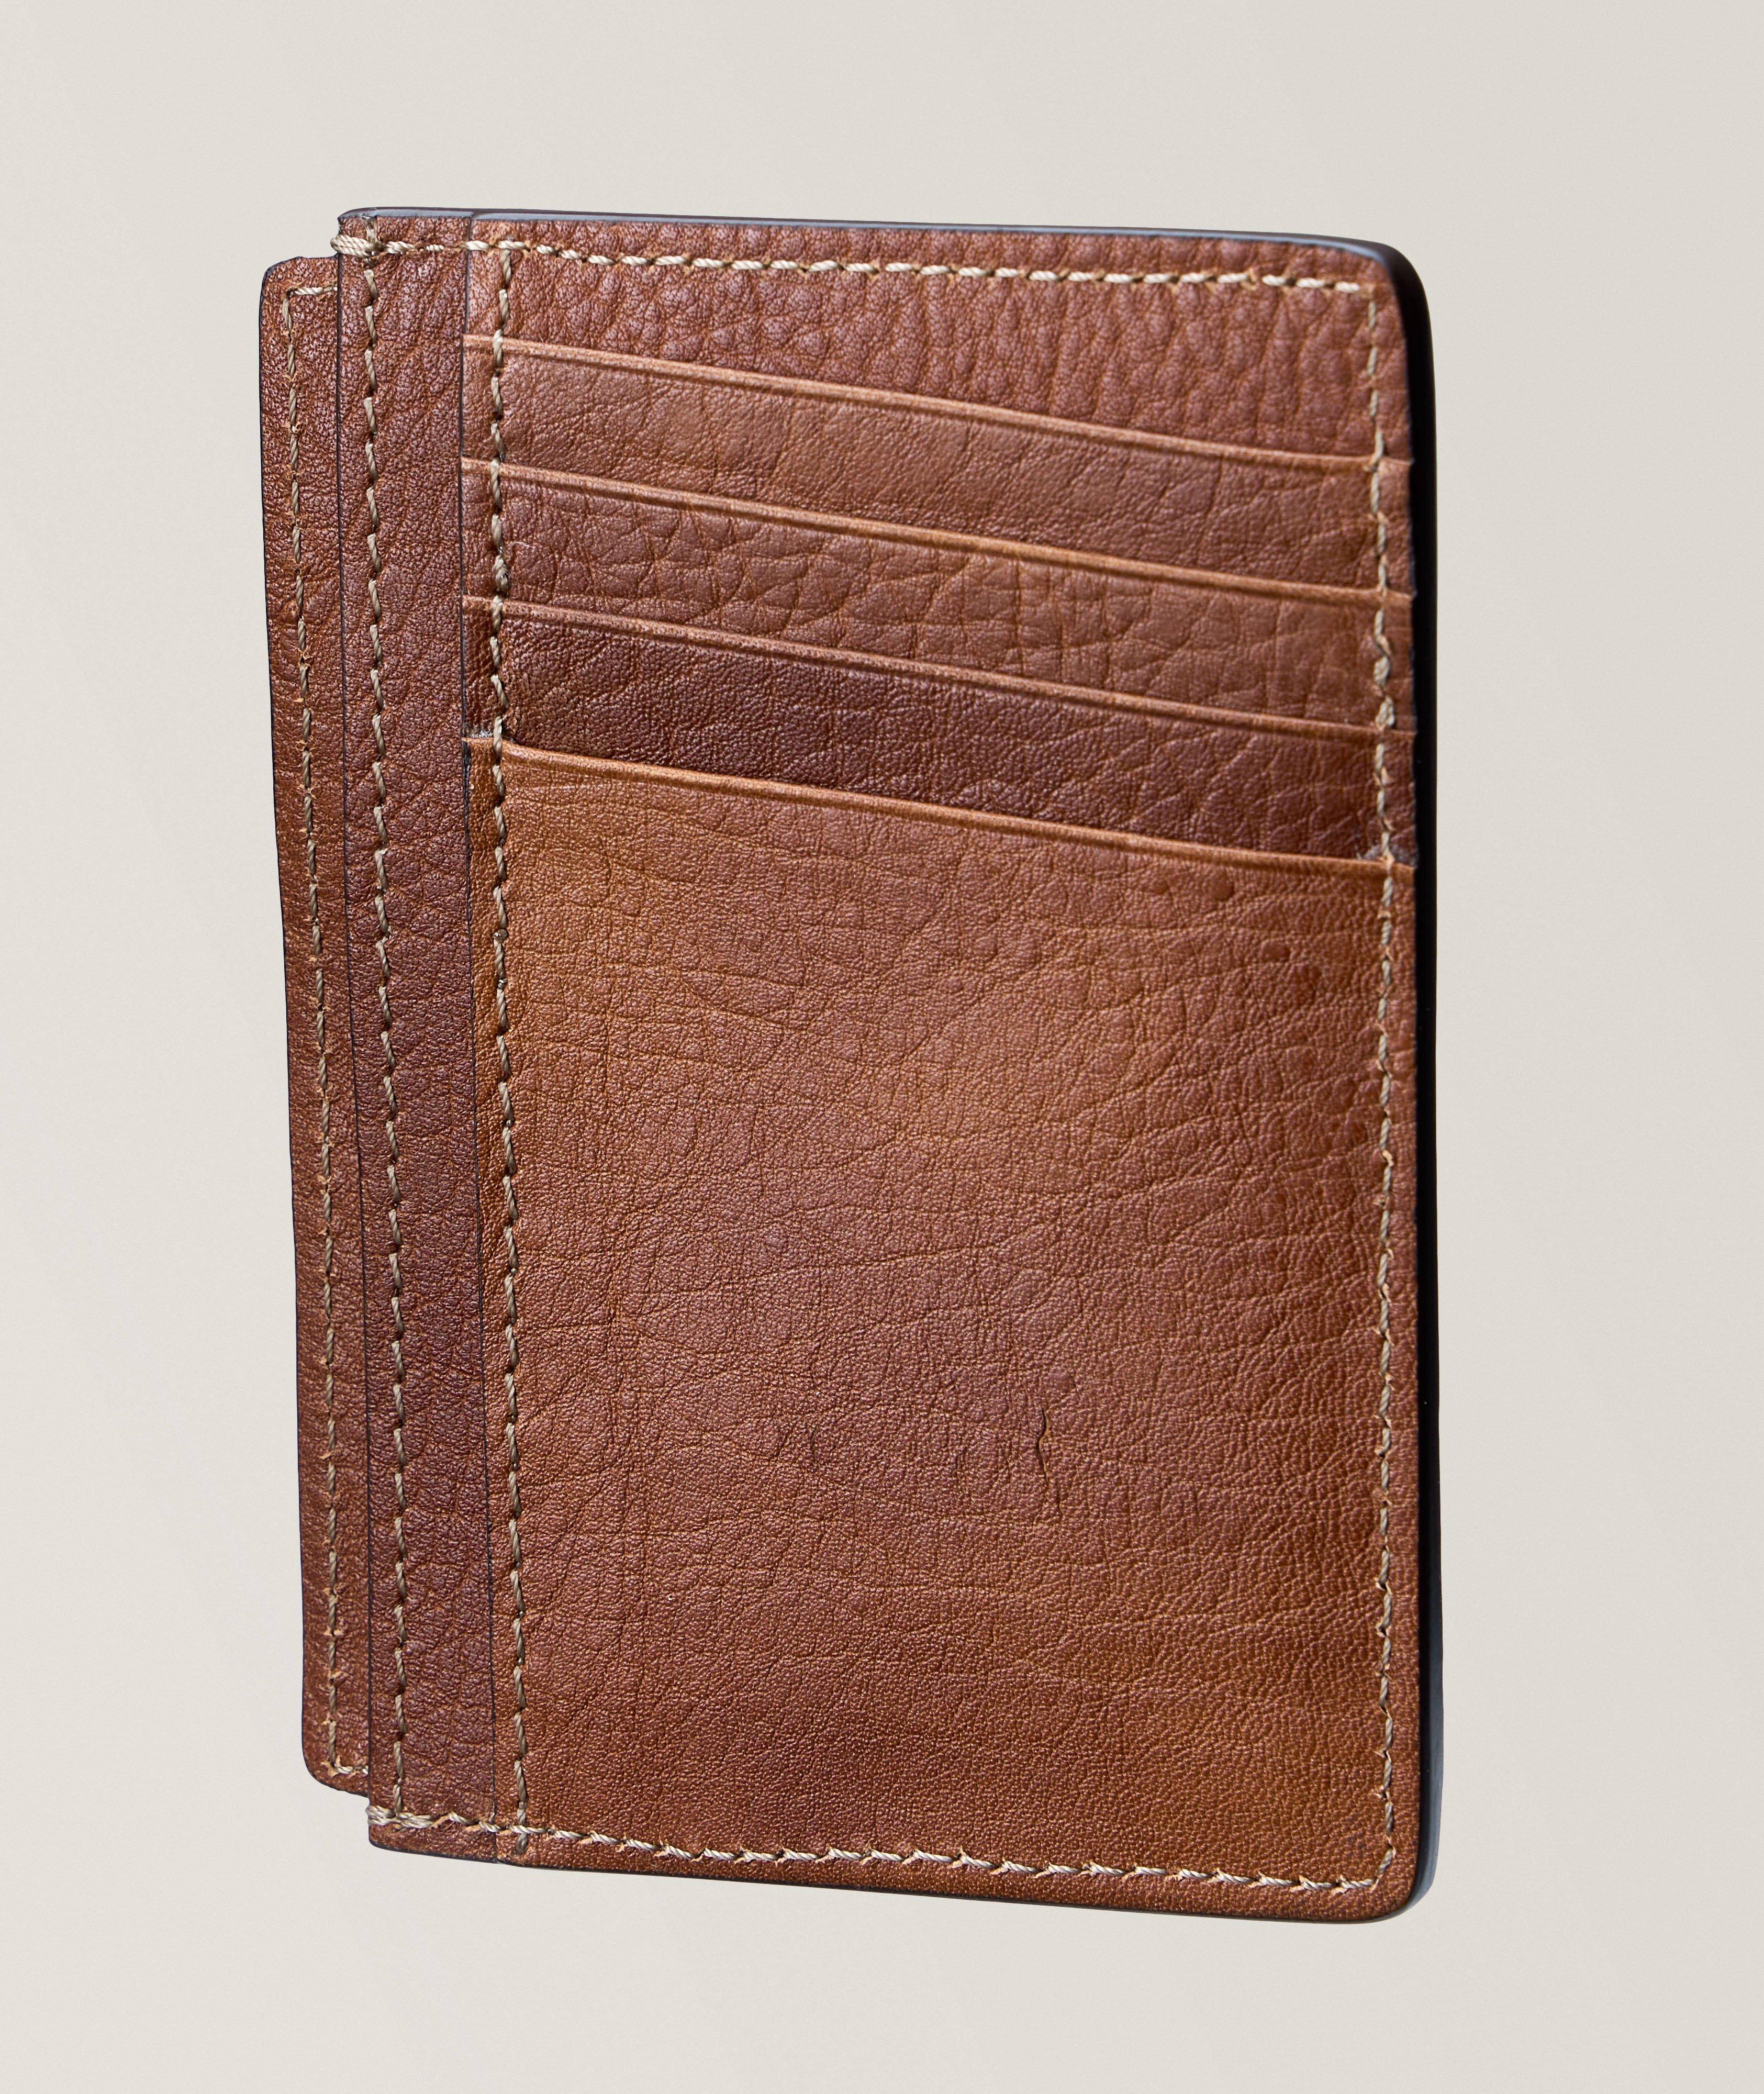 Grained Leather XL Bifold Wallet image 1